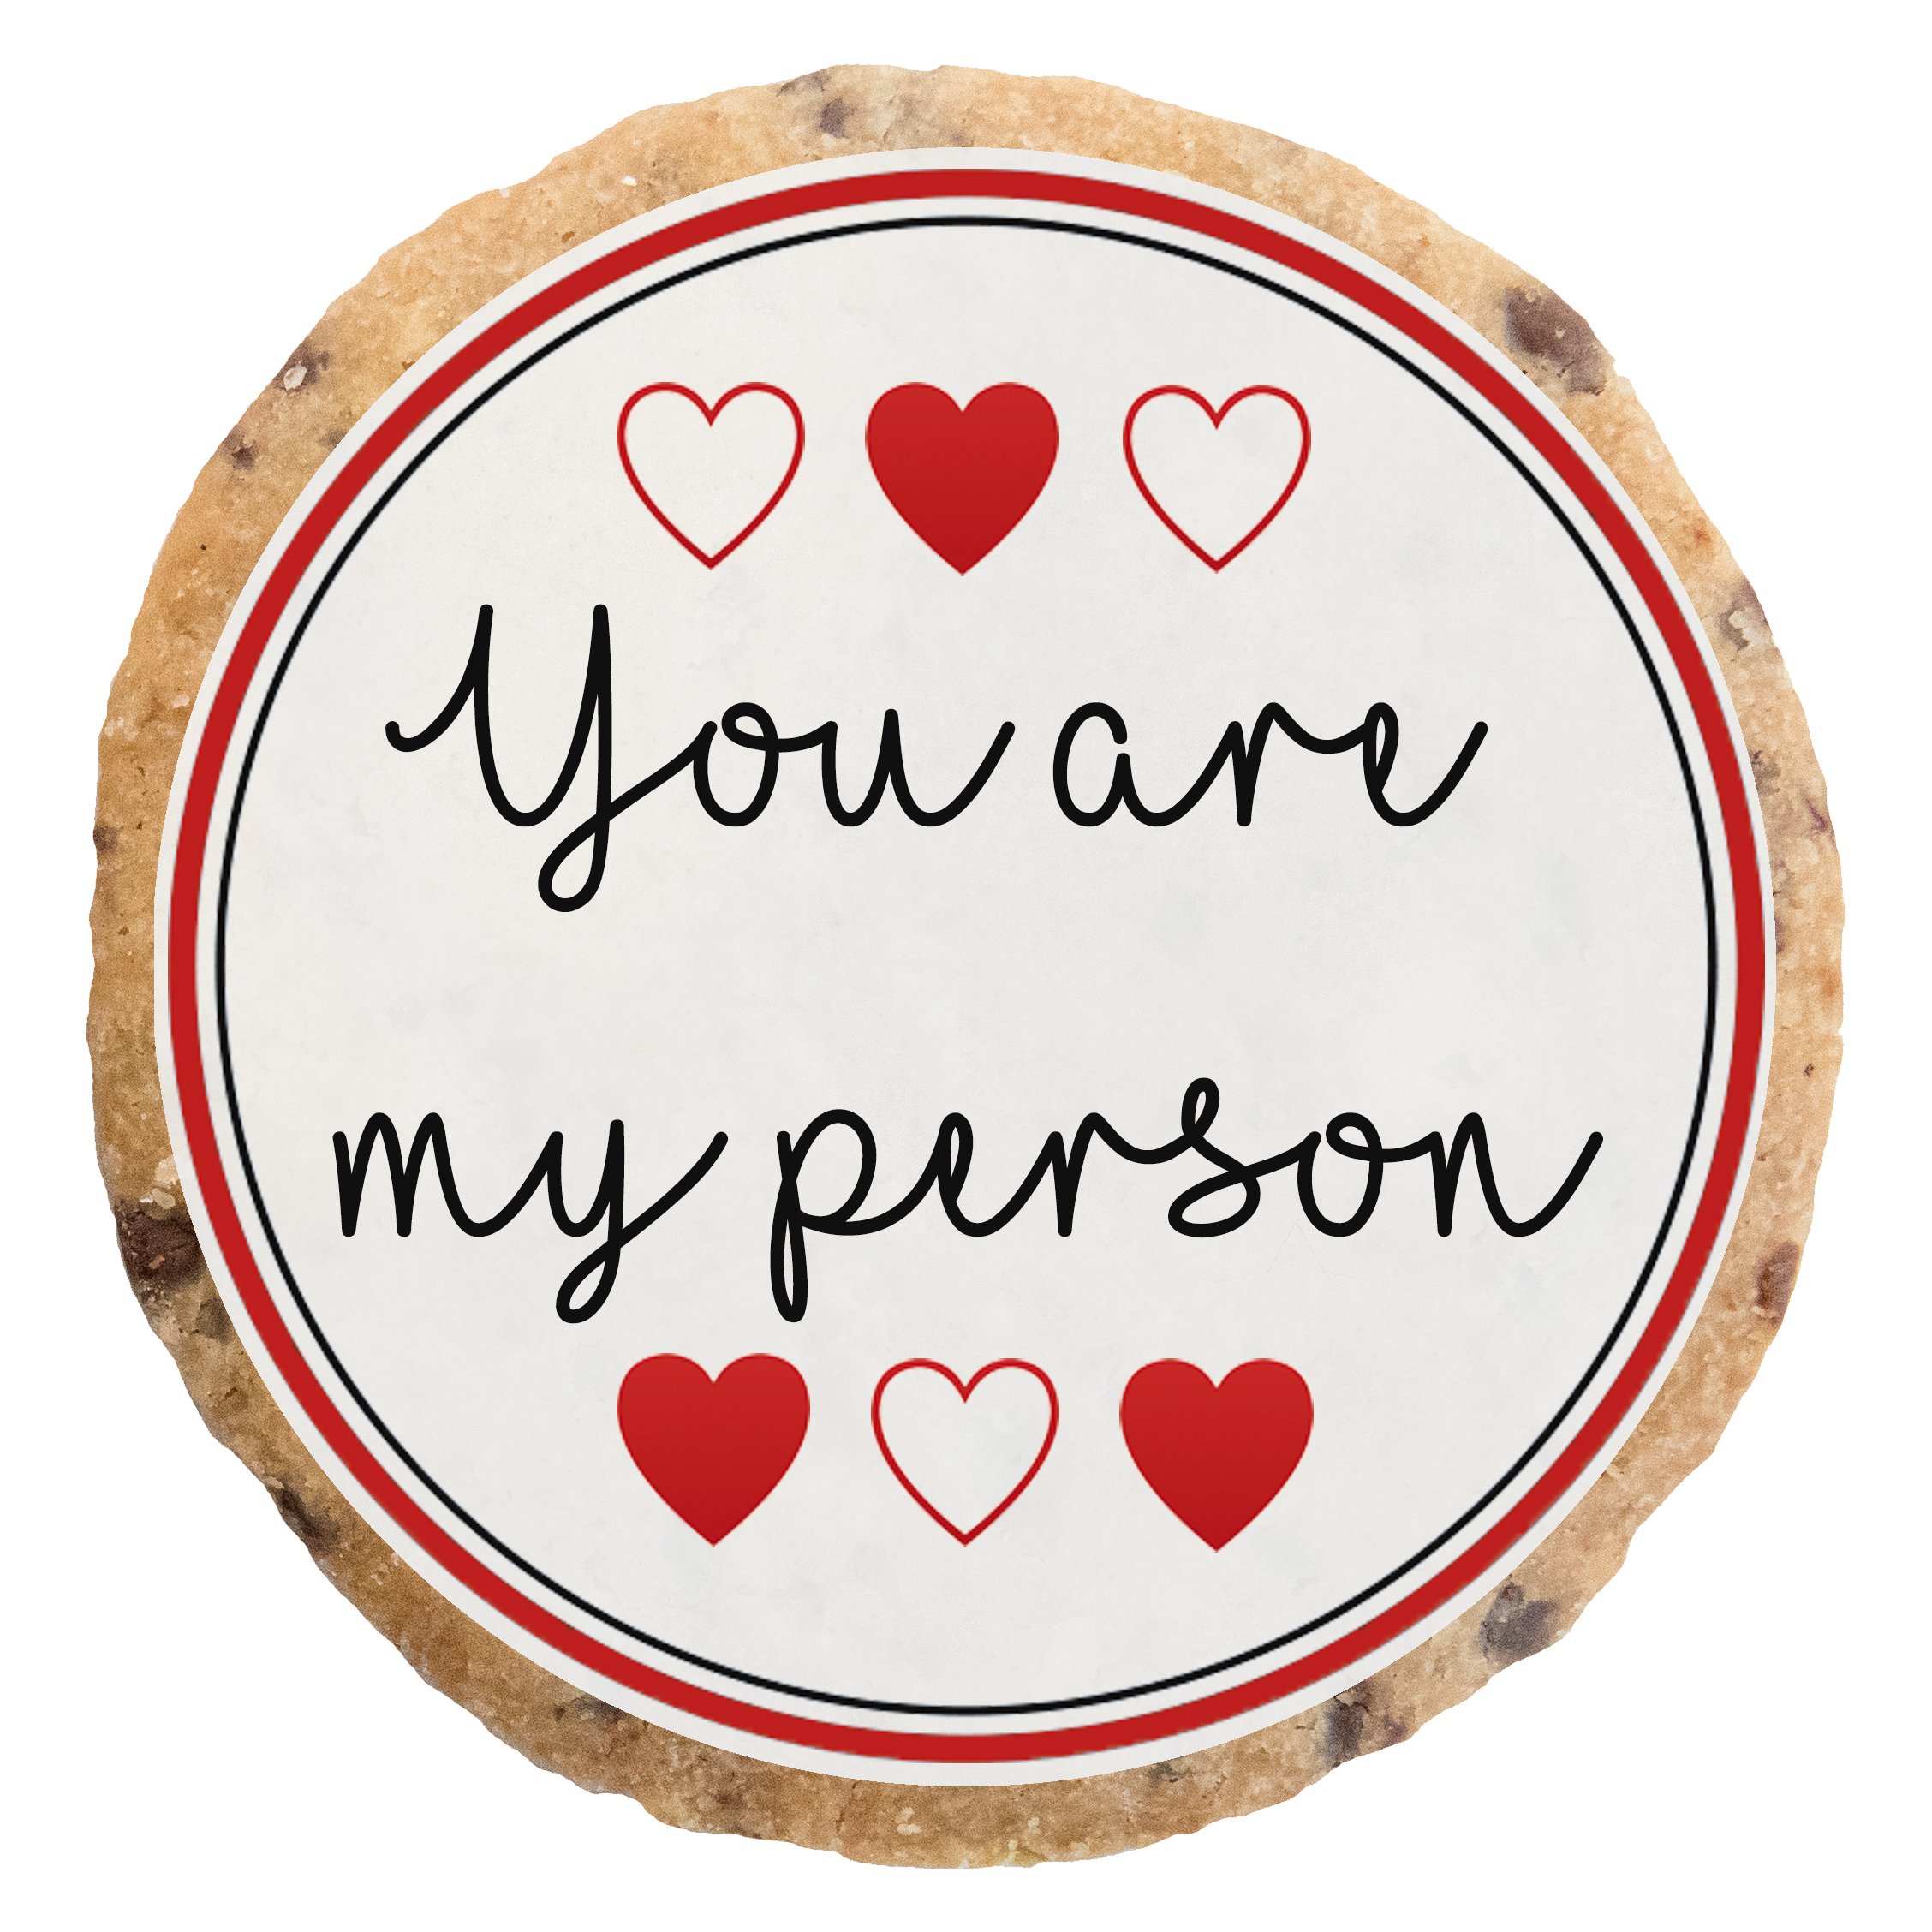 "You are my person" MotivKEKS